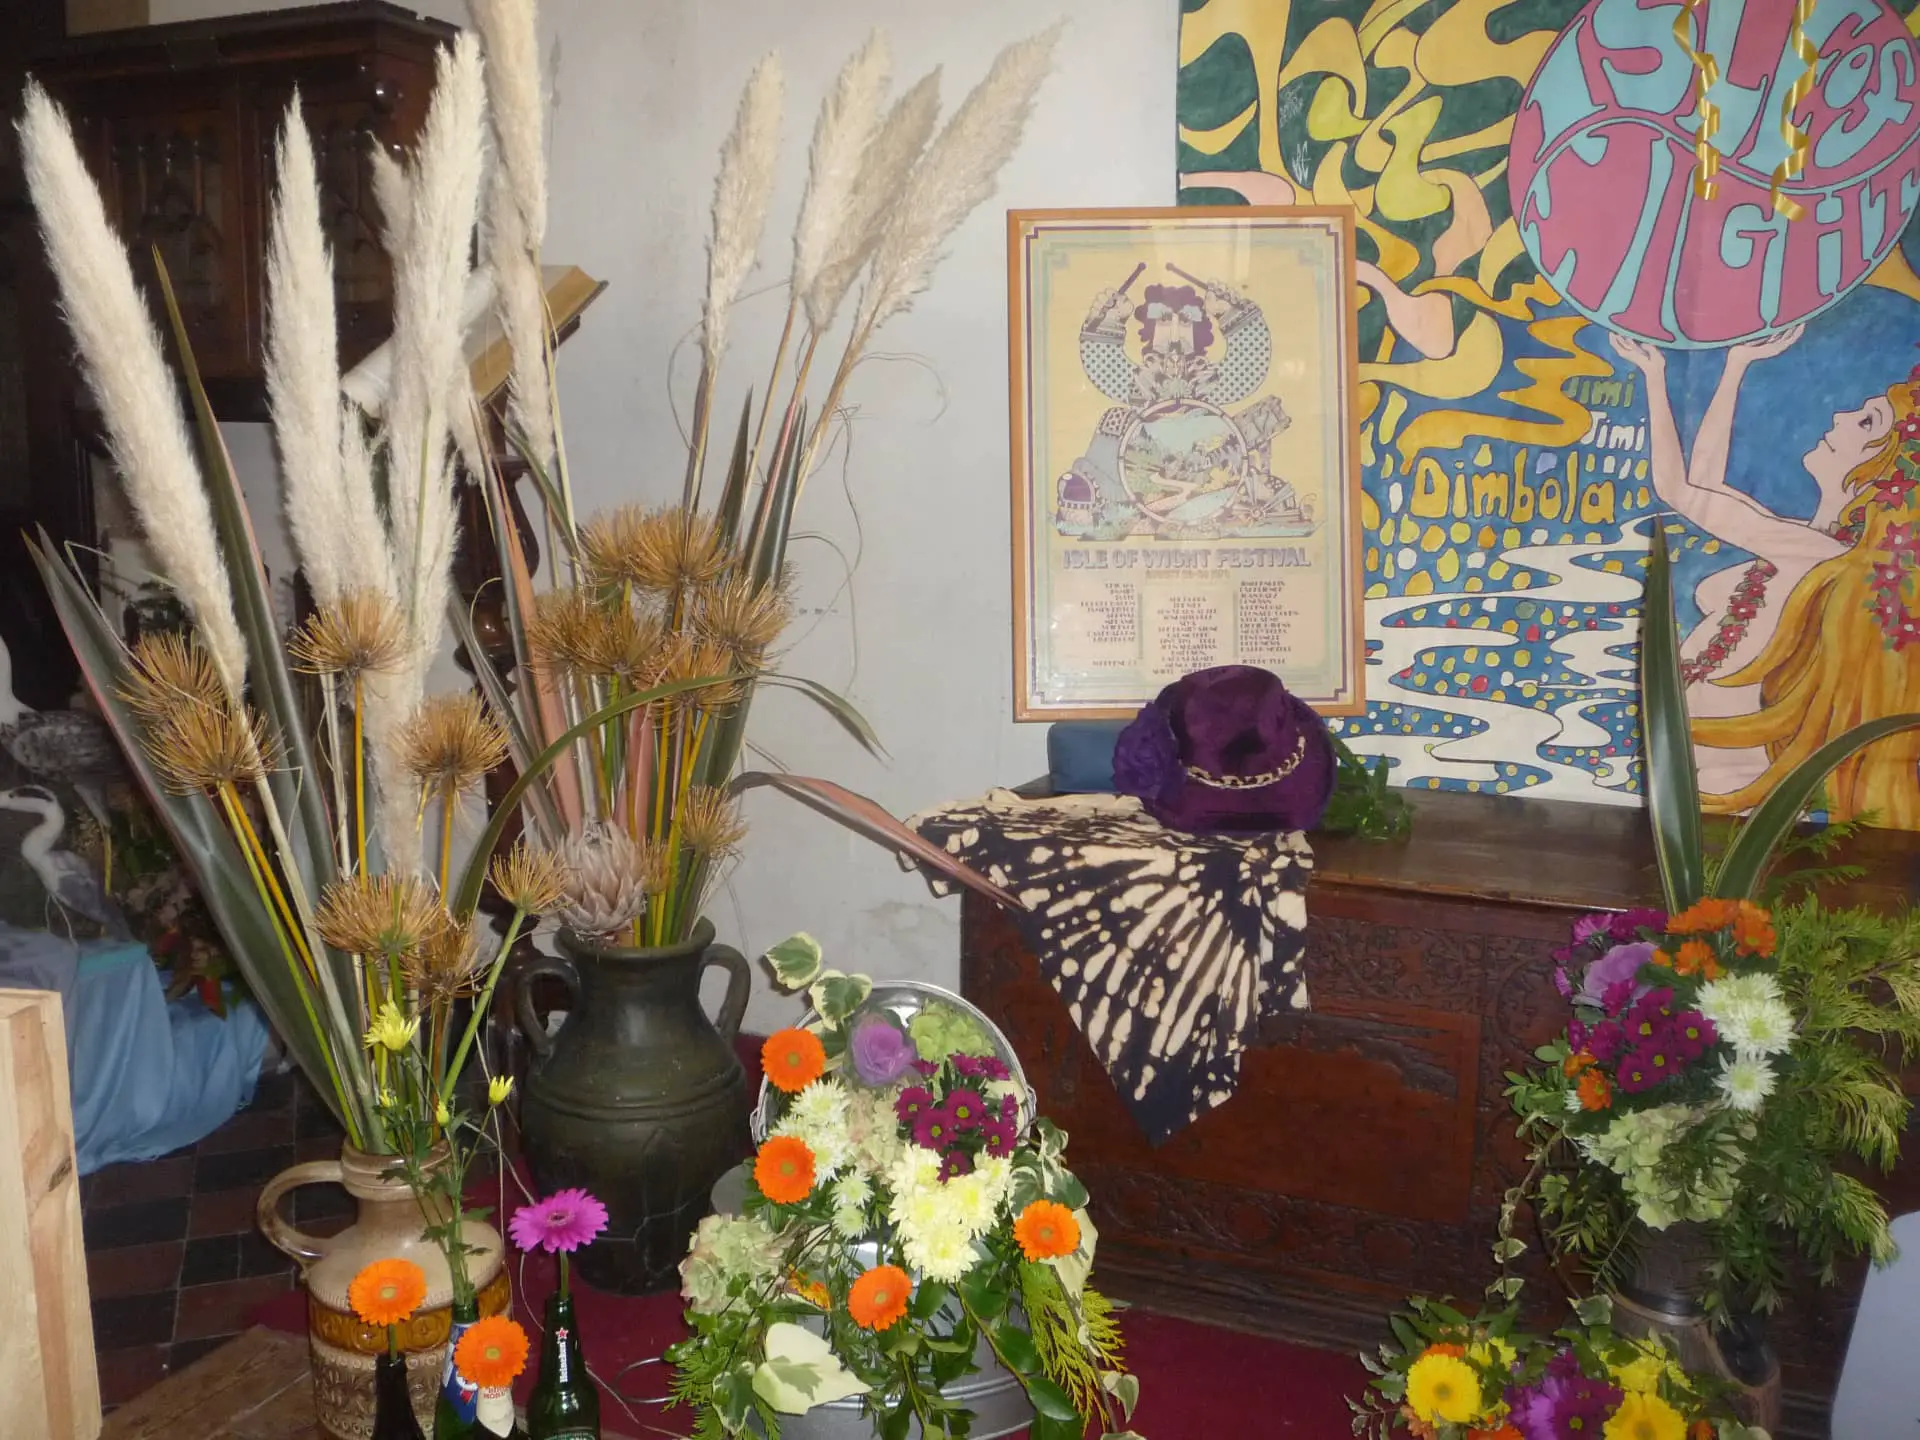 WI floral exhibition at Newport Minster